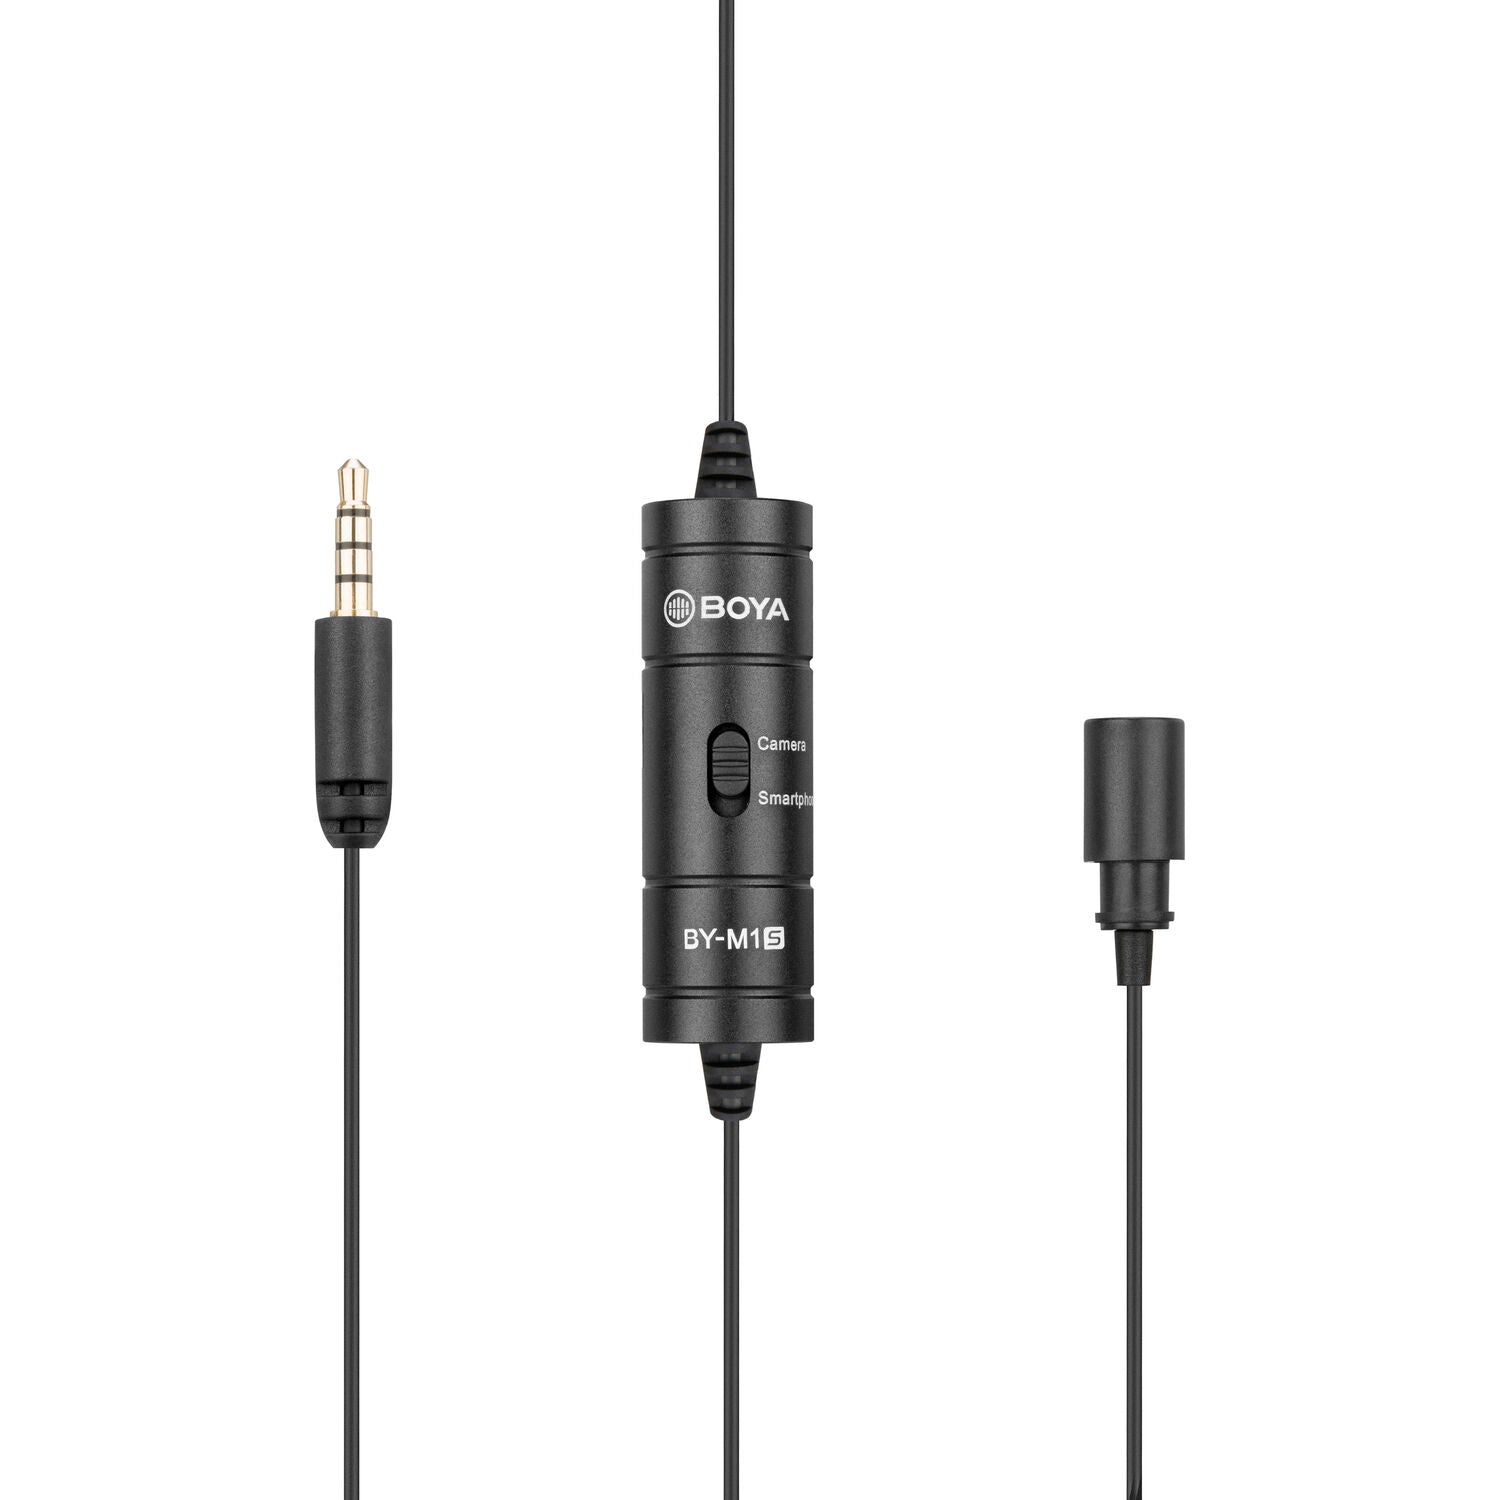 BOYA BY M1S with mount5 Omnidirectional Lavalier Microphone